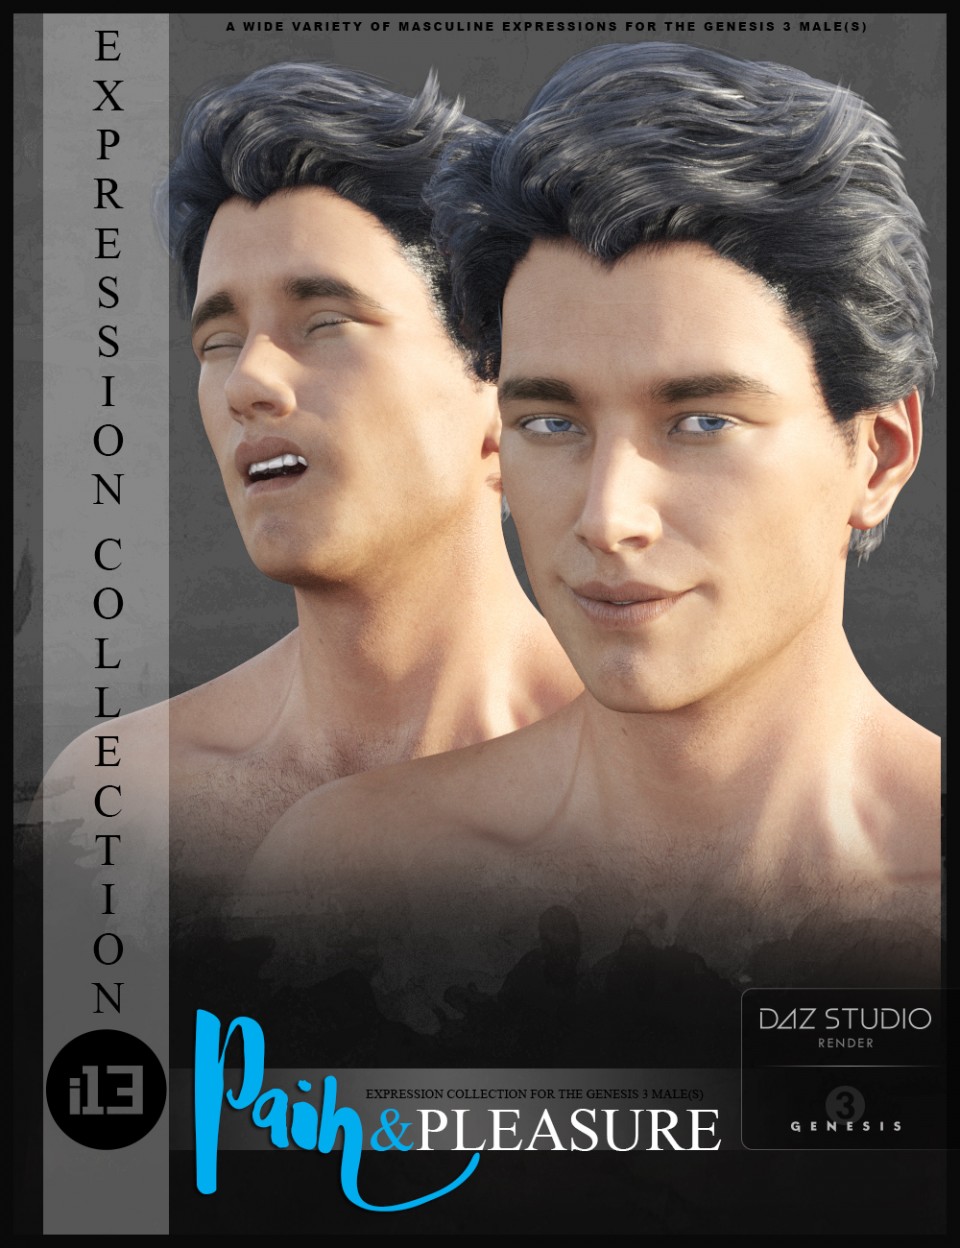 i13 Pain and Pleasure Expressions for the Genesis 3 Male(s)_DAZ3D下载站